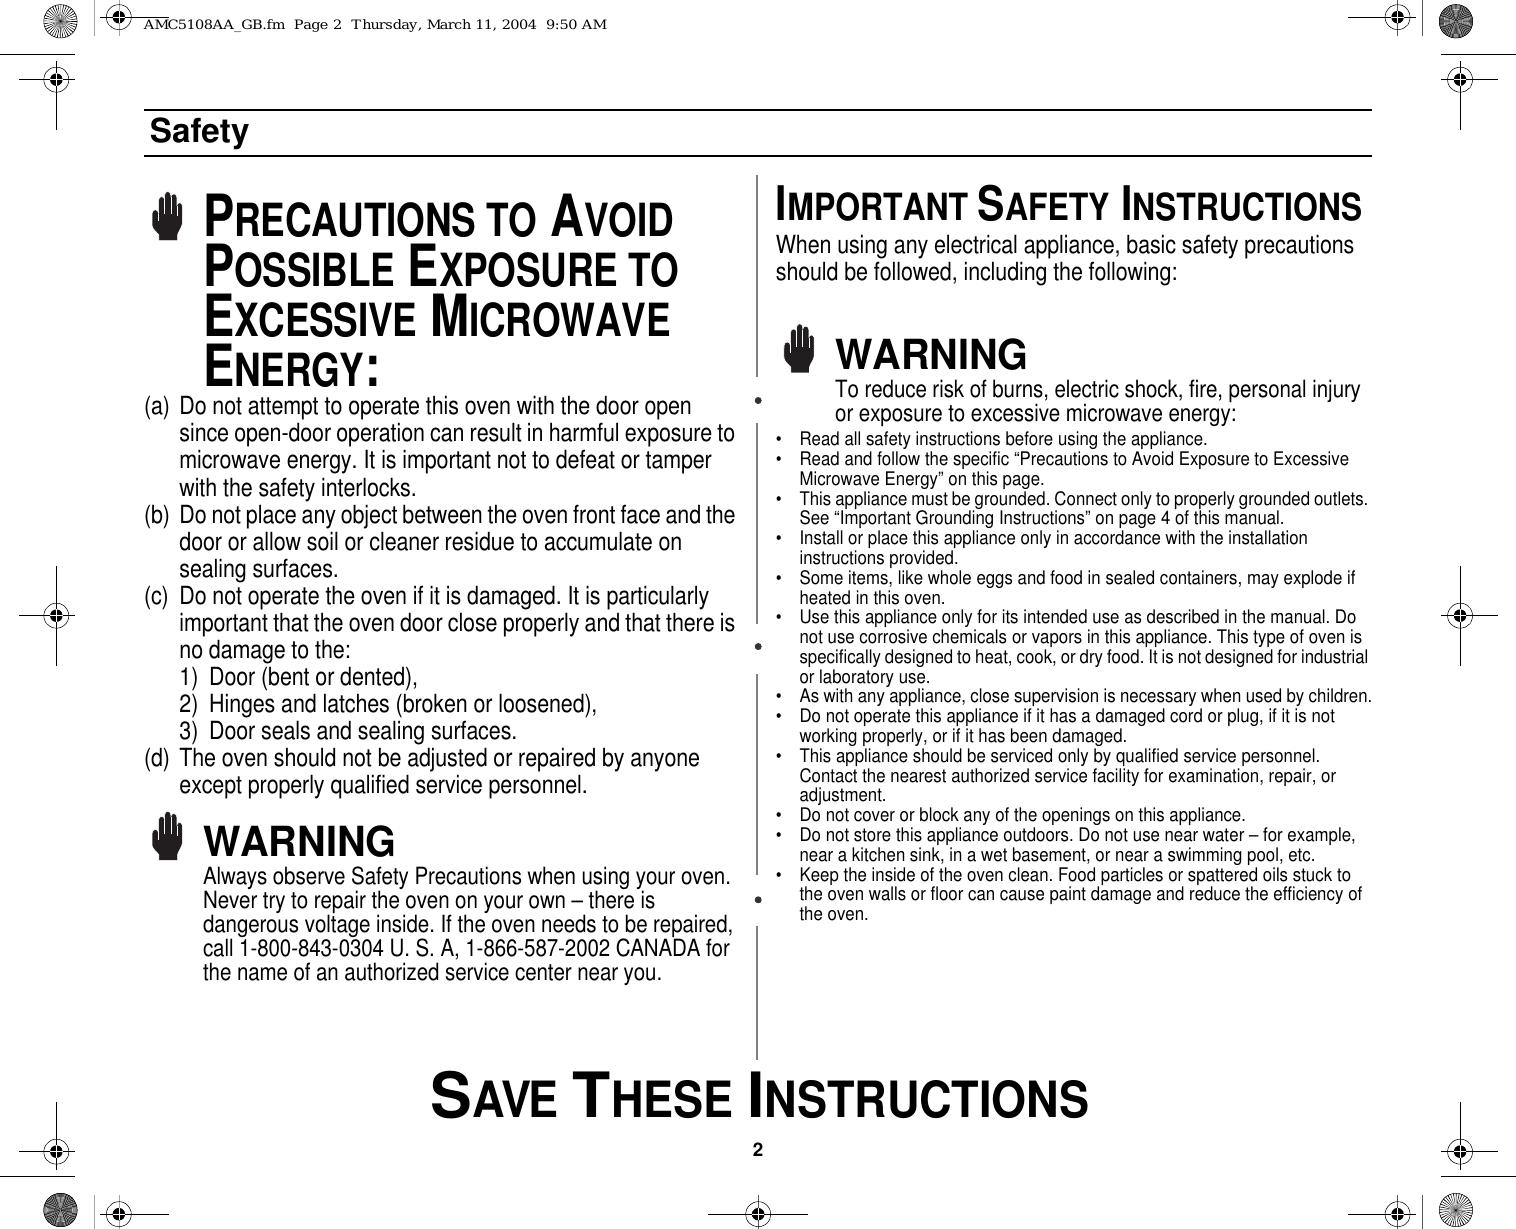 2 SAVE THESE INSTRUCTIONSSafetyPRECAUTIONS TO AVOID POSSIBLE EXPOSURE TO EXCESSIVE MICROWAVE ENERGY:(a) Do not attempt to operate this oven with the door open since open-door operation can result in harmful exposure to microwave energy. It is important not to defeat or tamper with the safety interlocks.(b) Do not place any object between the oven front face and the door or allow soil or cleaner residue to accumulate on sealing surfaces.(c) Do not operate the oven if it is damaged. It is particularly important that the oven door close properly and that there is no damage to the:1) Door (bent or dented), 2) Hinges and latches (broken or loosened), 3) Door seals and sealing surfaces.(d) The oven should not be adjusted or repaired by anyone except properly qualified service personnel.WARNINGAlways observe Safety Precautions when using your oven. Never try to repair the oven on your own – there is dangerous voltage inside. If the oven needs to be repaired, call 1-800-843-0304 U. S. A, 1-866-587-2002 CANADA for the name of an authorized service center near you.IMPORTANT SAFETY INSTRUCTIONSWhen using any electrical appliance, basic safety precautions should be followed, including the following:WARNINGTo reduce risk of burns, electric shock, fire, personal injury or exposure to excessive microwave energy:• Read all safety instructions before using the appliance.• Read and follow the specific “Precautions to Avoid Exposure to Excessive Microwave Energy” on this page.• This appliance must be grounded. Connect only to properly grounded outlets. See “Important Grounding Instructions” on page 4 of this manual. • Install or place this appliance only in accordance with the installation instructions provided.• Some items, like whole eggs and food in sealed containers, may explode if heated in this oven.• Use this appliance only for its intended use as described in the manual. Do not use corrosive chemicals or vapors in this appliance. This type of oven is specifically designed to heat, cook, or dry food. It is not designed for industrial or laboratory use.• As with any appliance, close supervision is necessary when used by children.• Do not operate this appliance if it has a damaged cord or plug, if it is not working properly, or if it has been damaged.• This appliance should be serviced only by qualified service personnel. Contact the nearest authorized service facility for examination, repair, or adjustment.• Do not cover or block any of the openings on this appliance.• Do not store this appliance outdoors. Do not use near water – for example, near a kitchen sink, in a wet basement, or near a swimming pool, etc. • Keep the inside of the oven clean. Food particles or spattered oils stuck to the oven walls or floor can cause paint damage and reduce the efficiency of the oven.AMC5108AA_GB.fm  Page 2  Thursday, March 11, 2004  9:50 AM